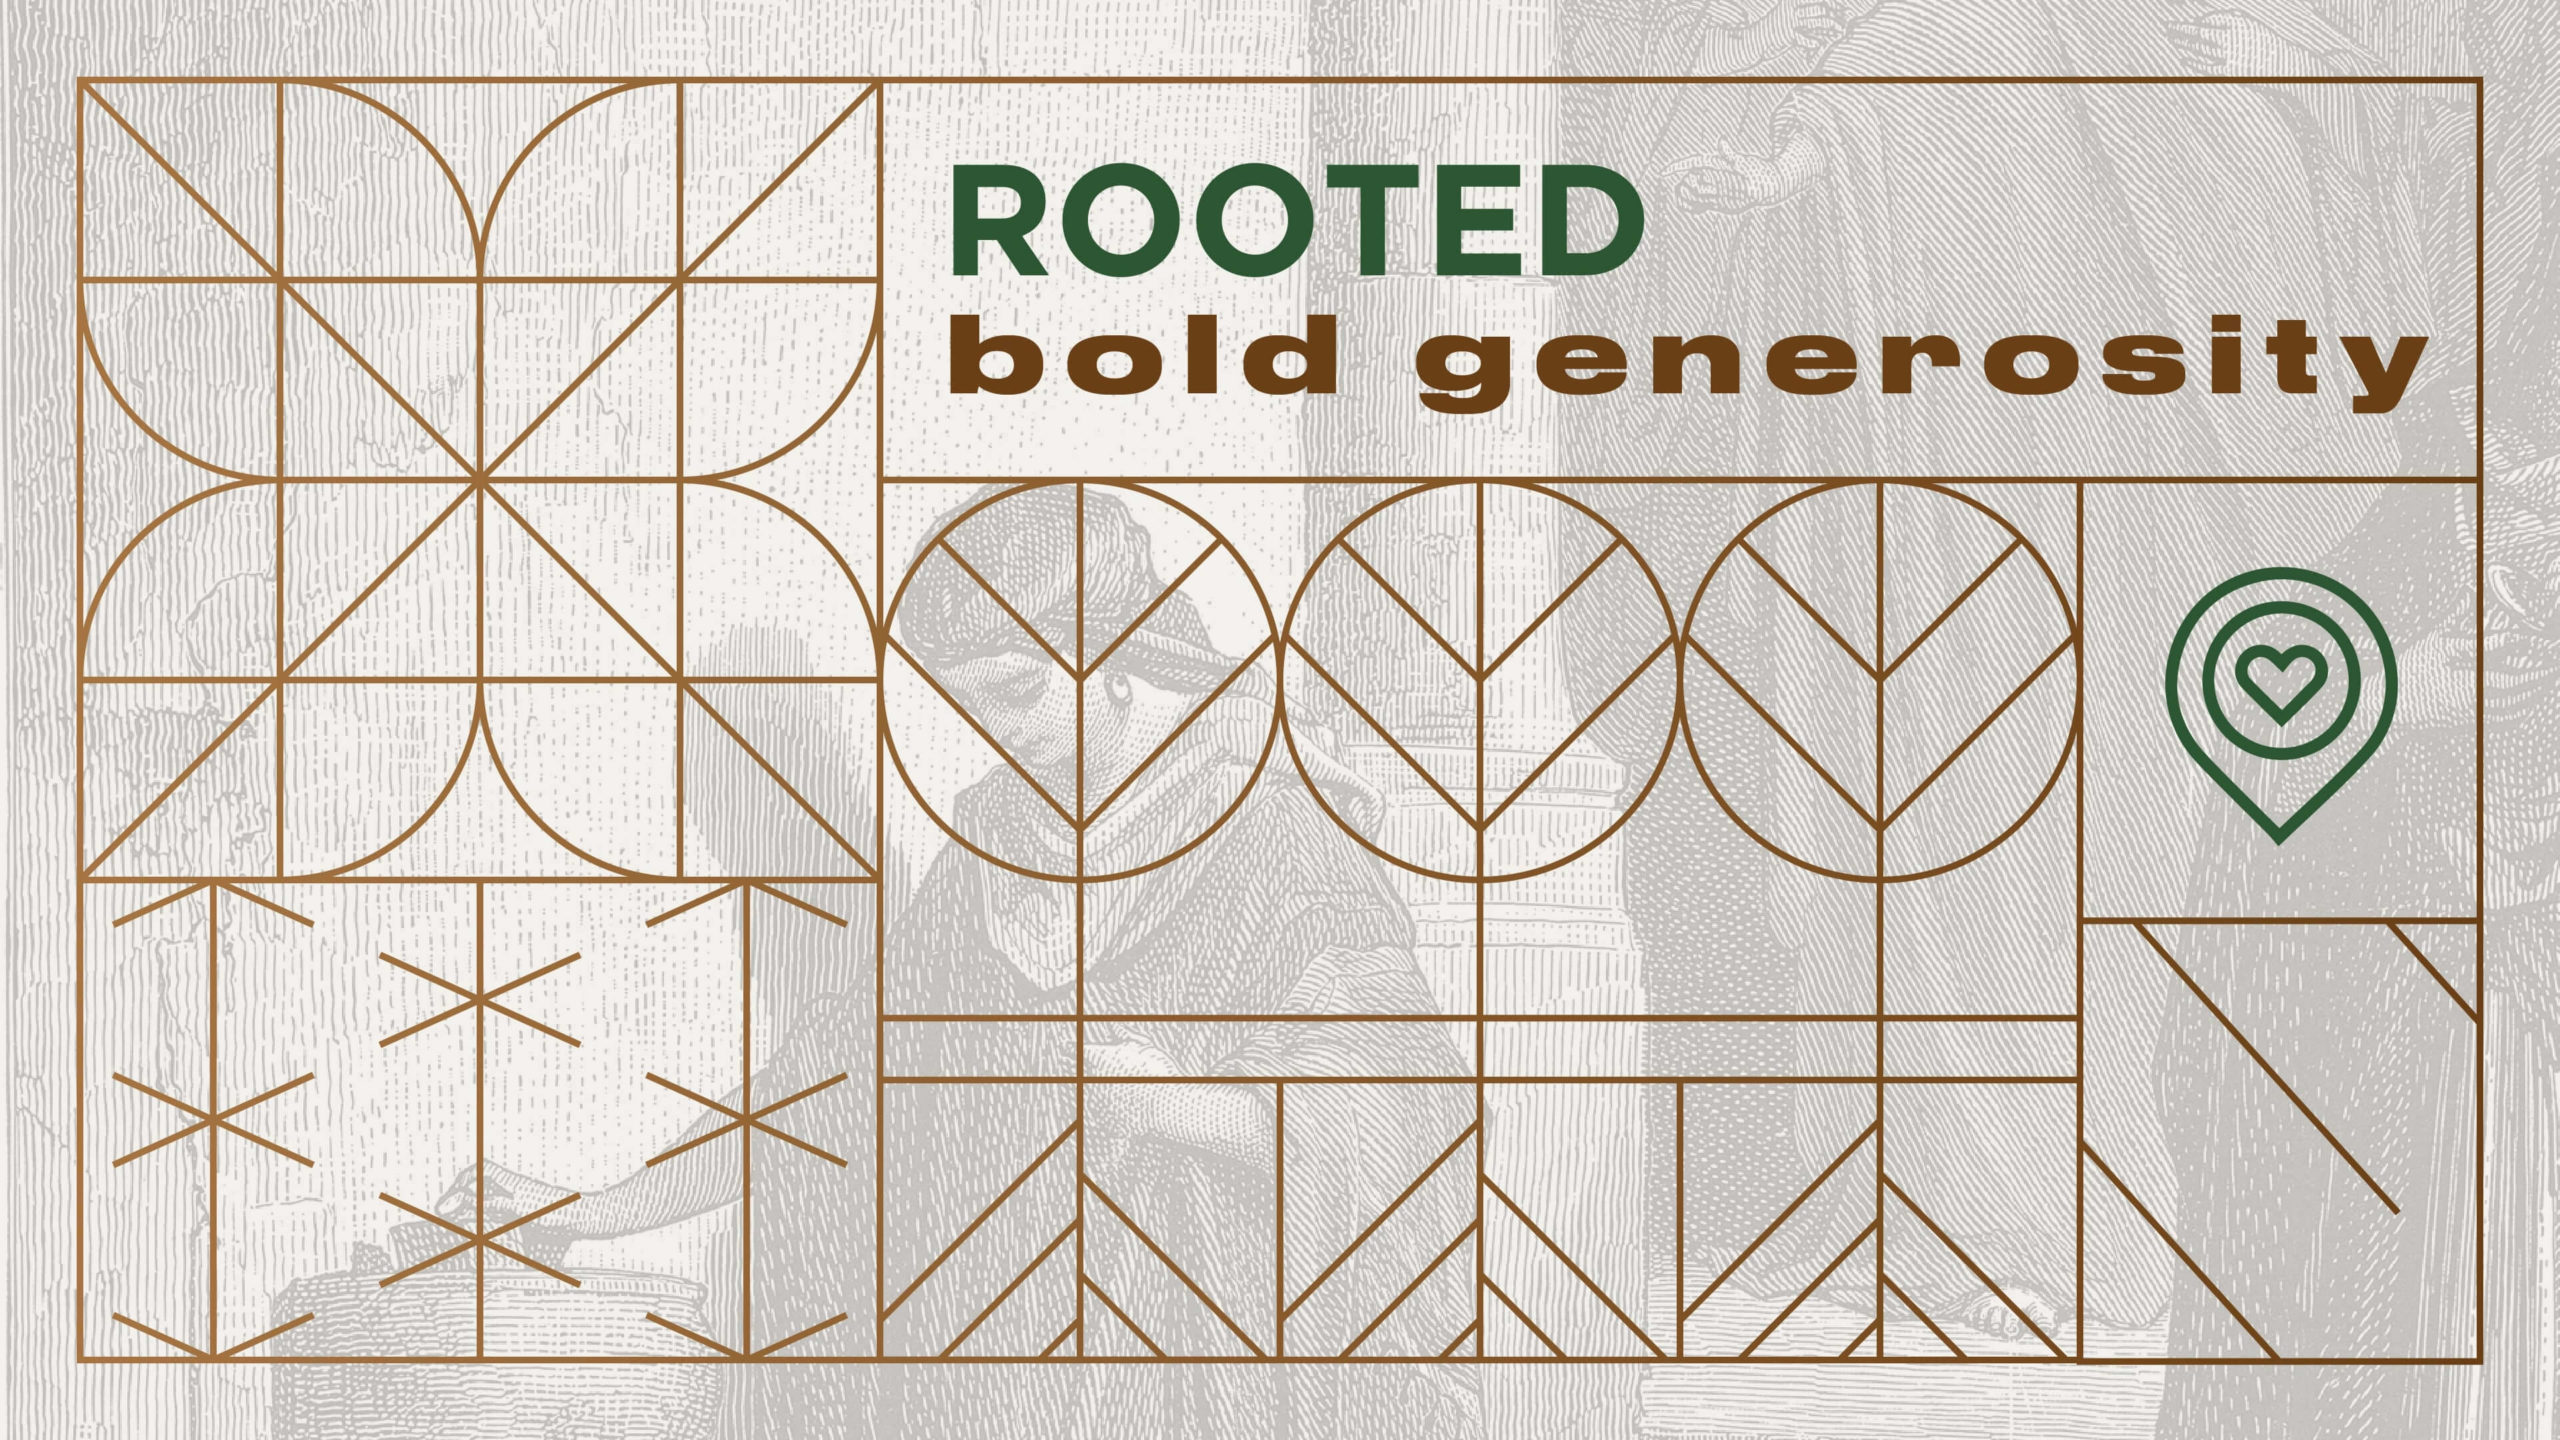 Rooted: Bold Generosity